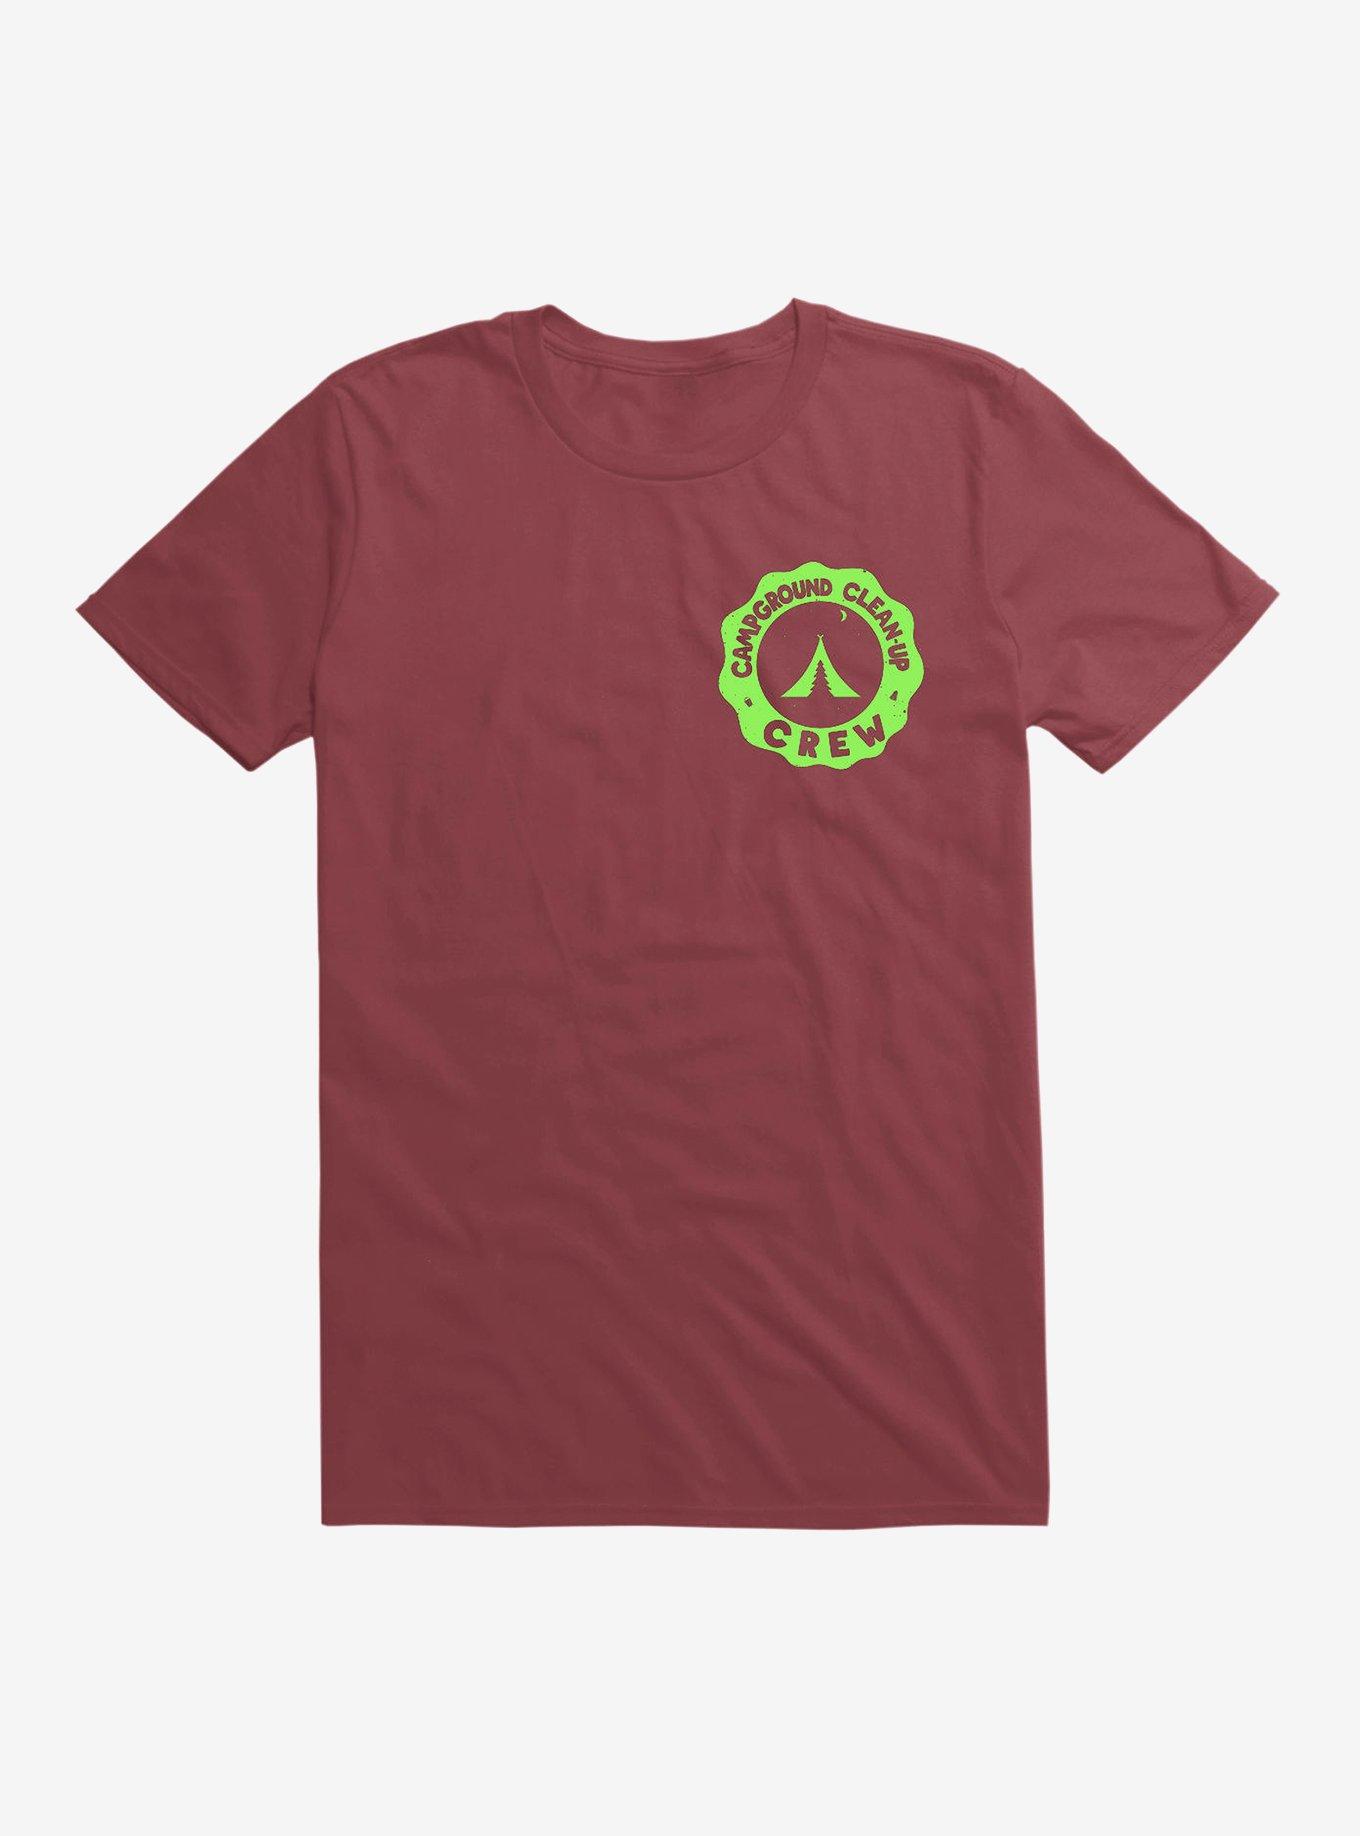 Campground Cleanup Crew T-Shirt, SCARLET, hi-res